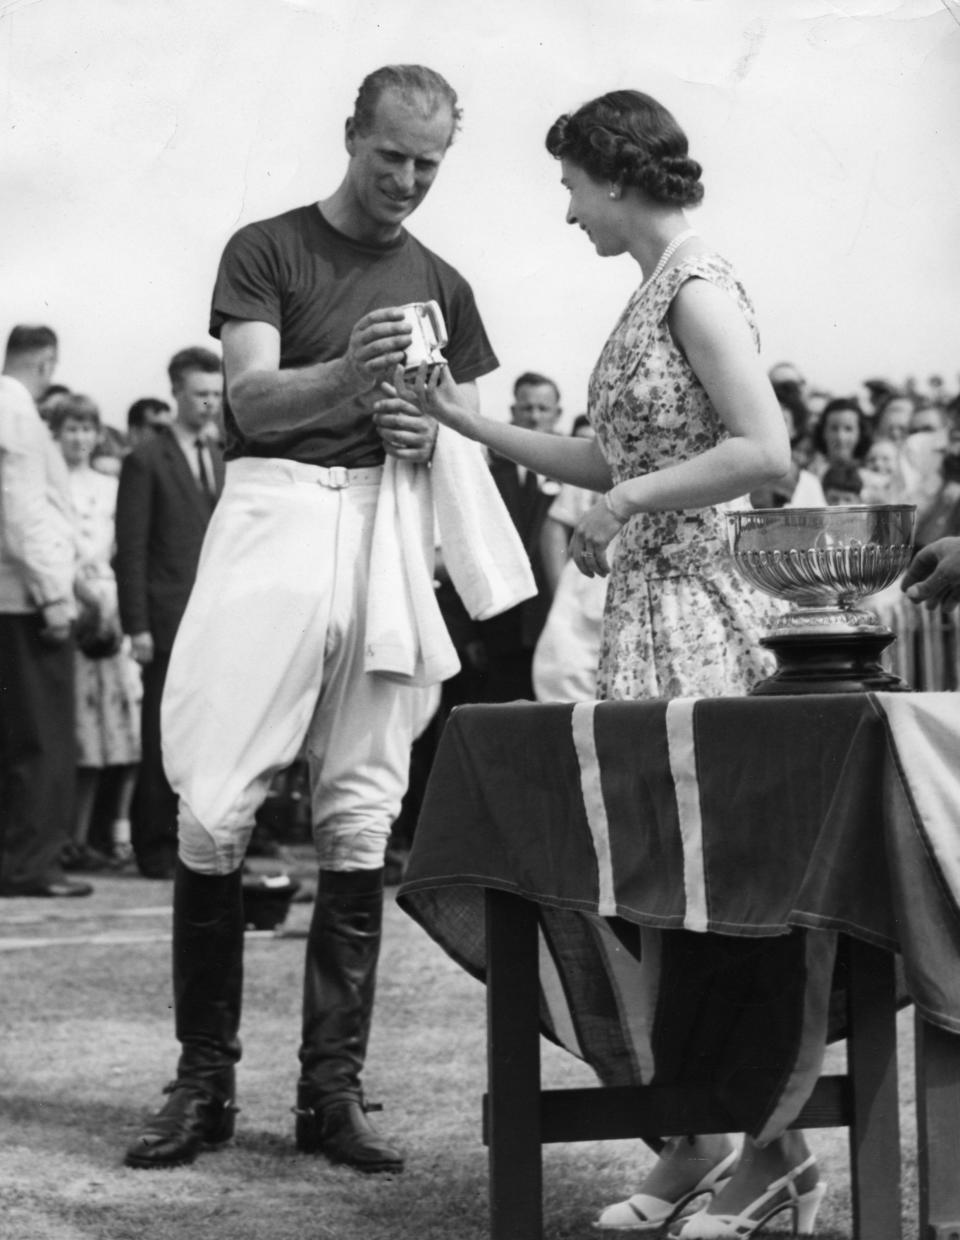 The couple, pictured here at a polo match in 1957, had trouble adjusting to&nbsp;their new lives.<br /><br />&ldquo;Elizabeth had a lot to&nbsp;learn as queen and also had everyday jobs in addition to opening hospitals and other royal duties,&rdquo; Bose said. &ldquo;She was concerned for her husband&rsquo;s need for a sense of identity and gave him duties. Eventually, he was able to establish several very worthy charity initiatives, like the&nbsp;<a href="https://www.dofe.org/" target="_blank" data-beacon-parsed="true">Duke of Edinburgh&rsquo;s Award</a>.&rdquo;